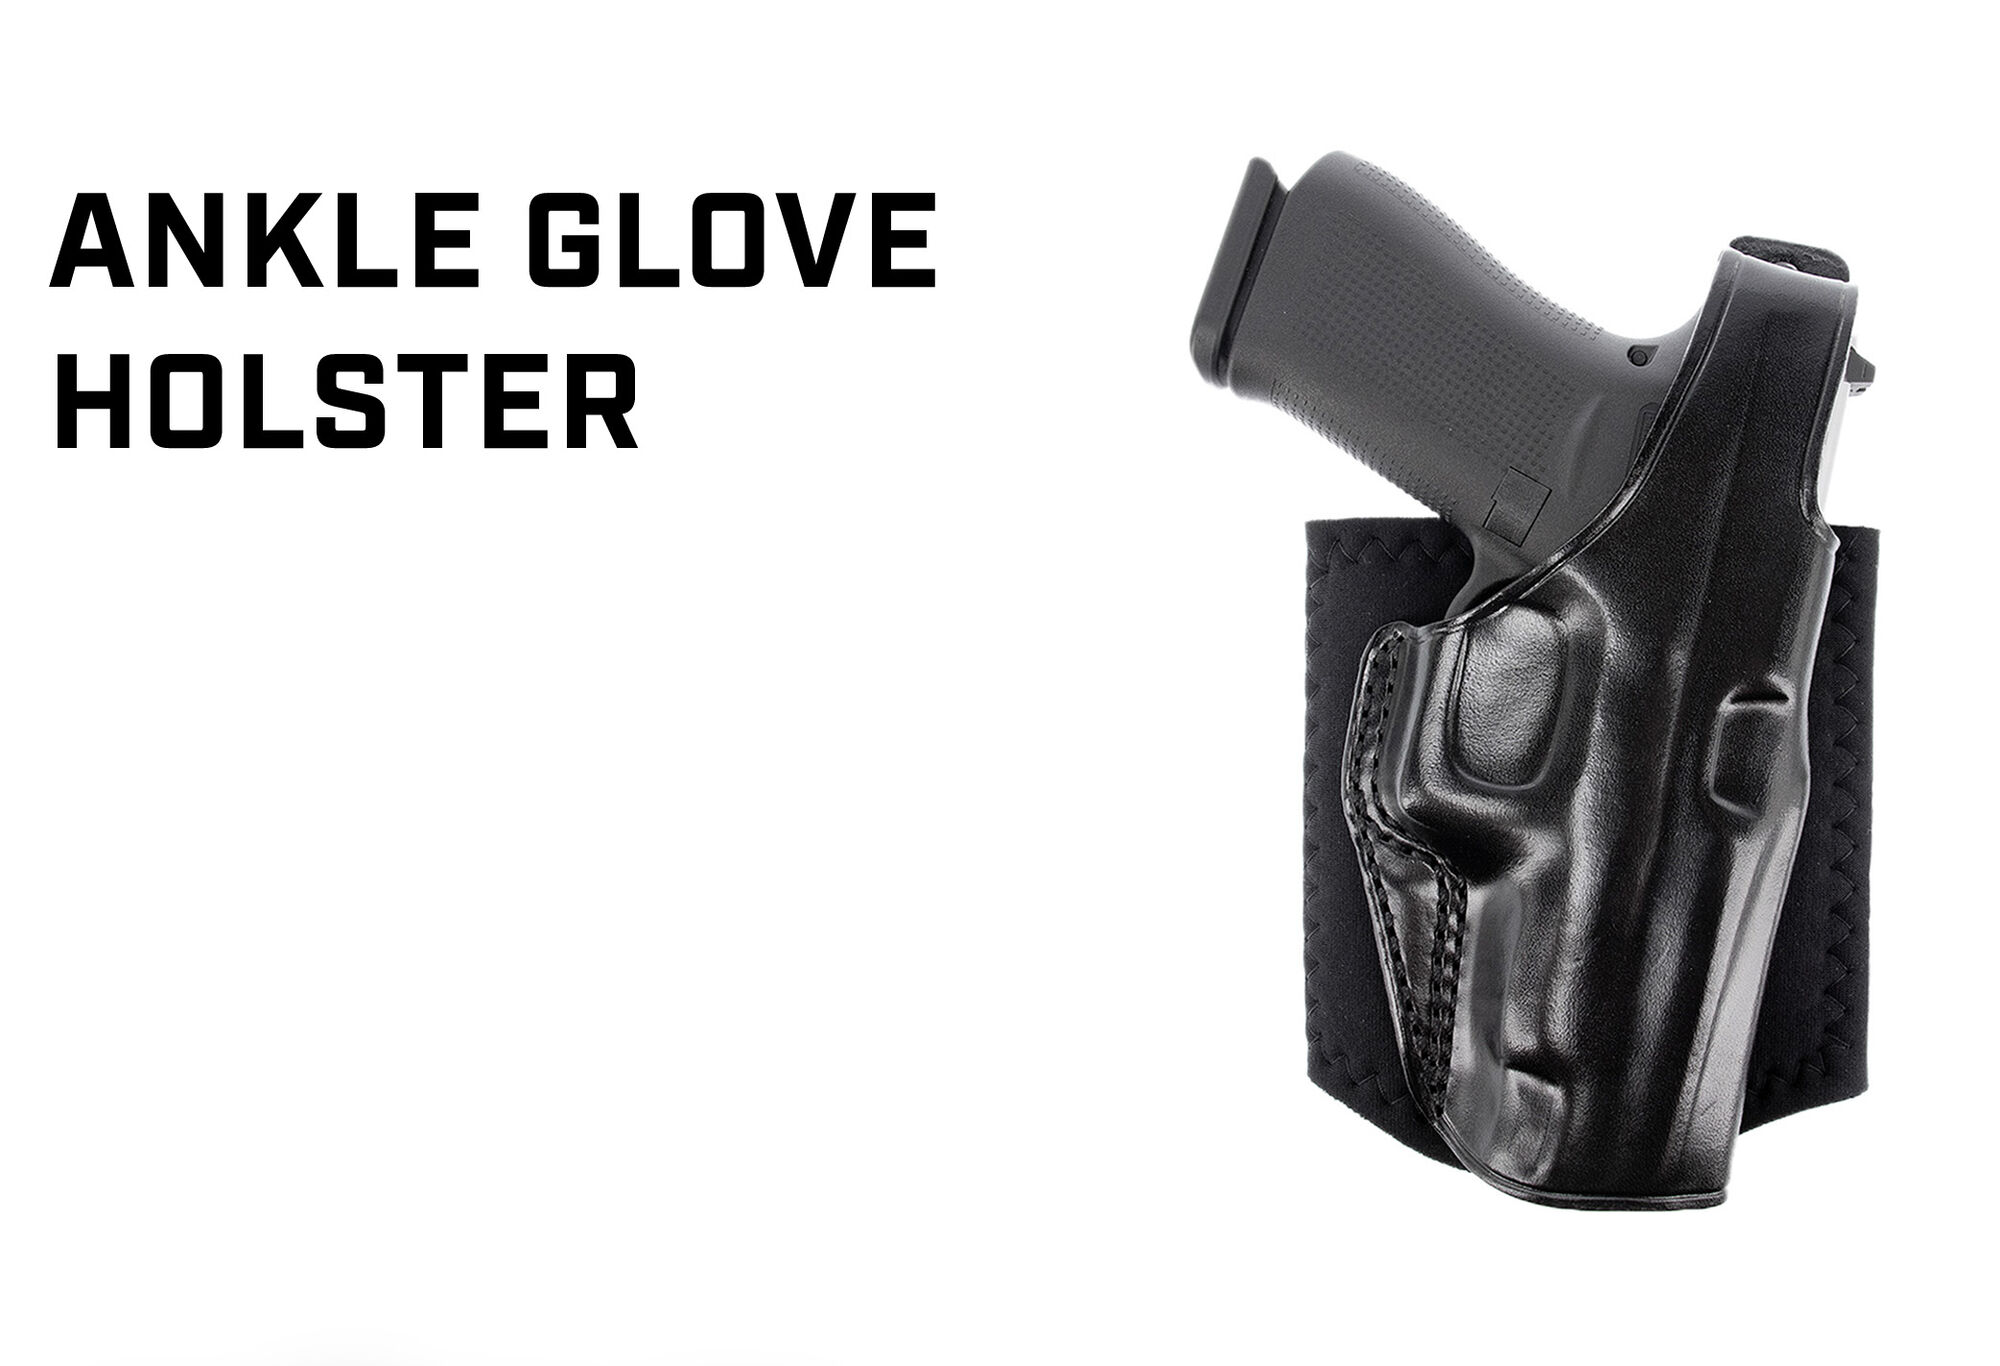 Ankle Glove Holster